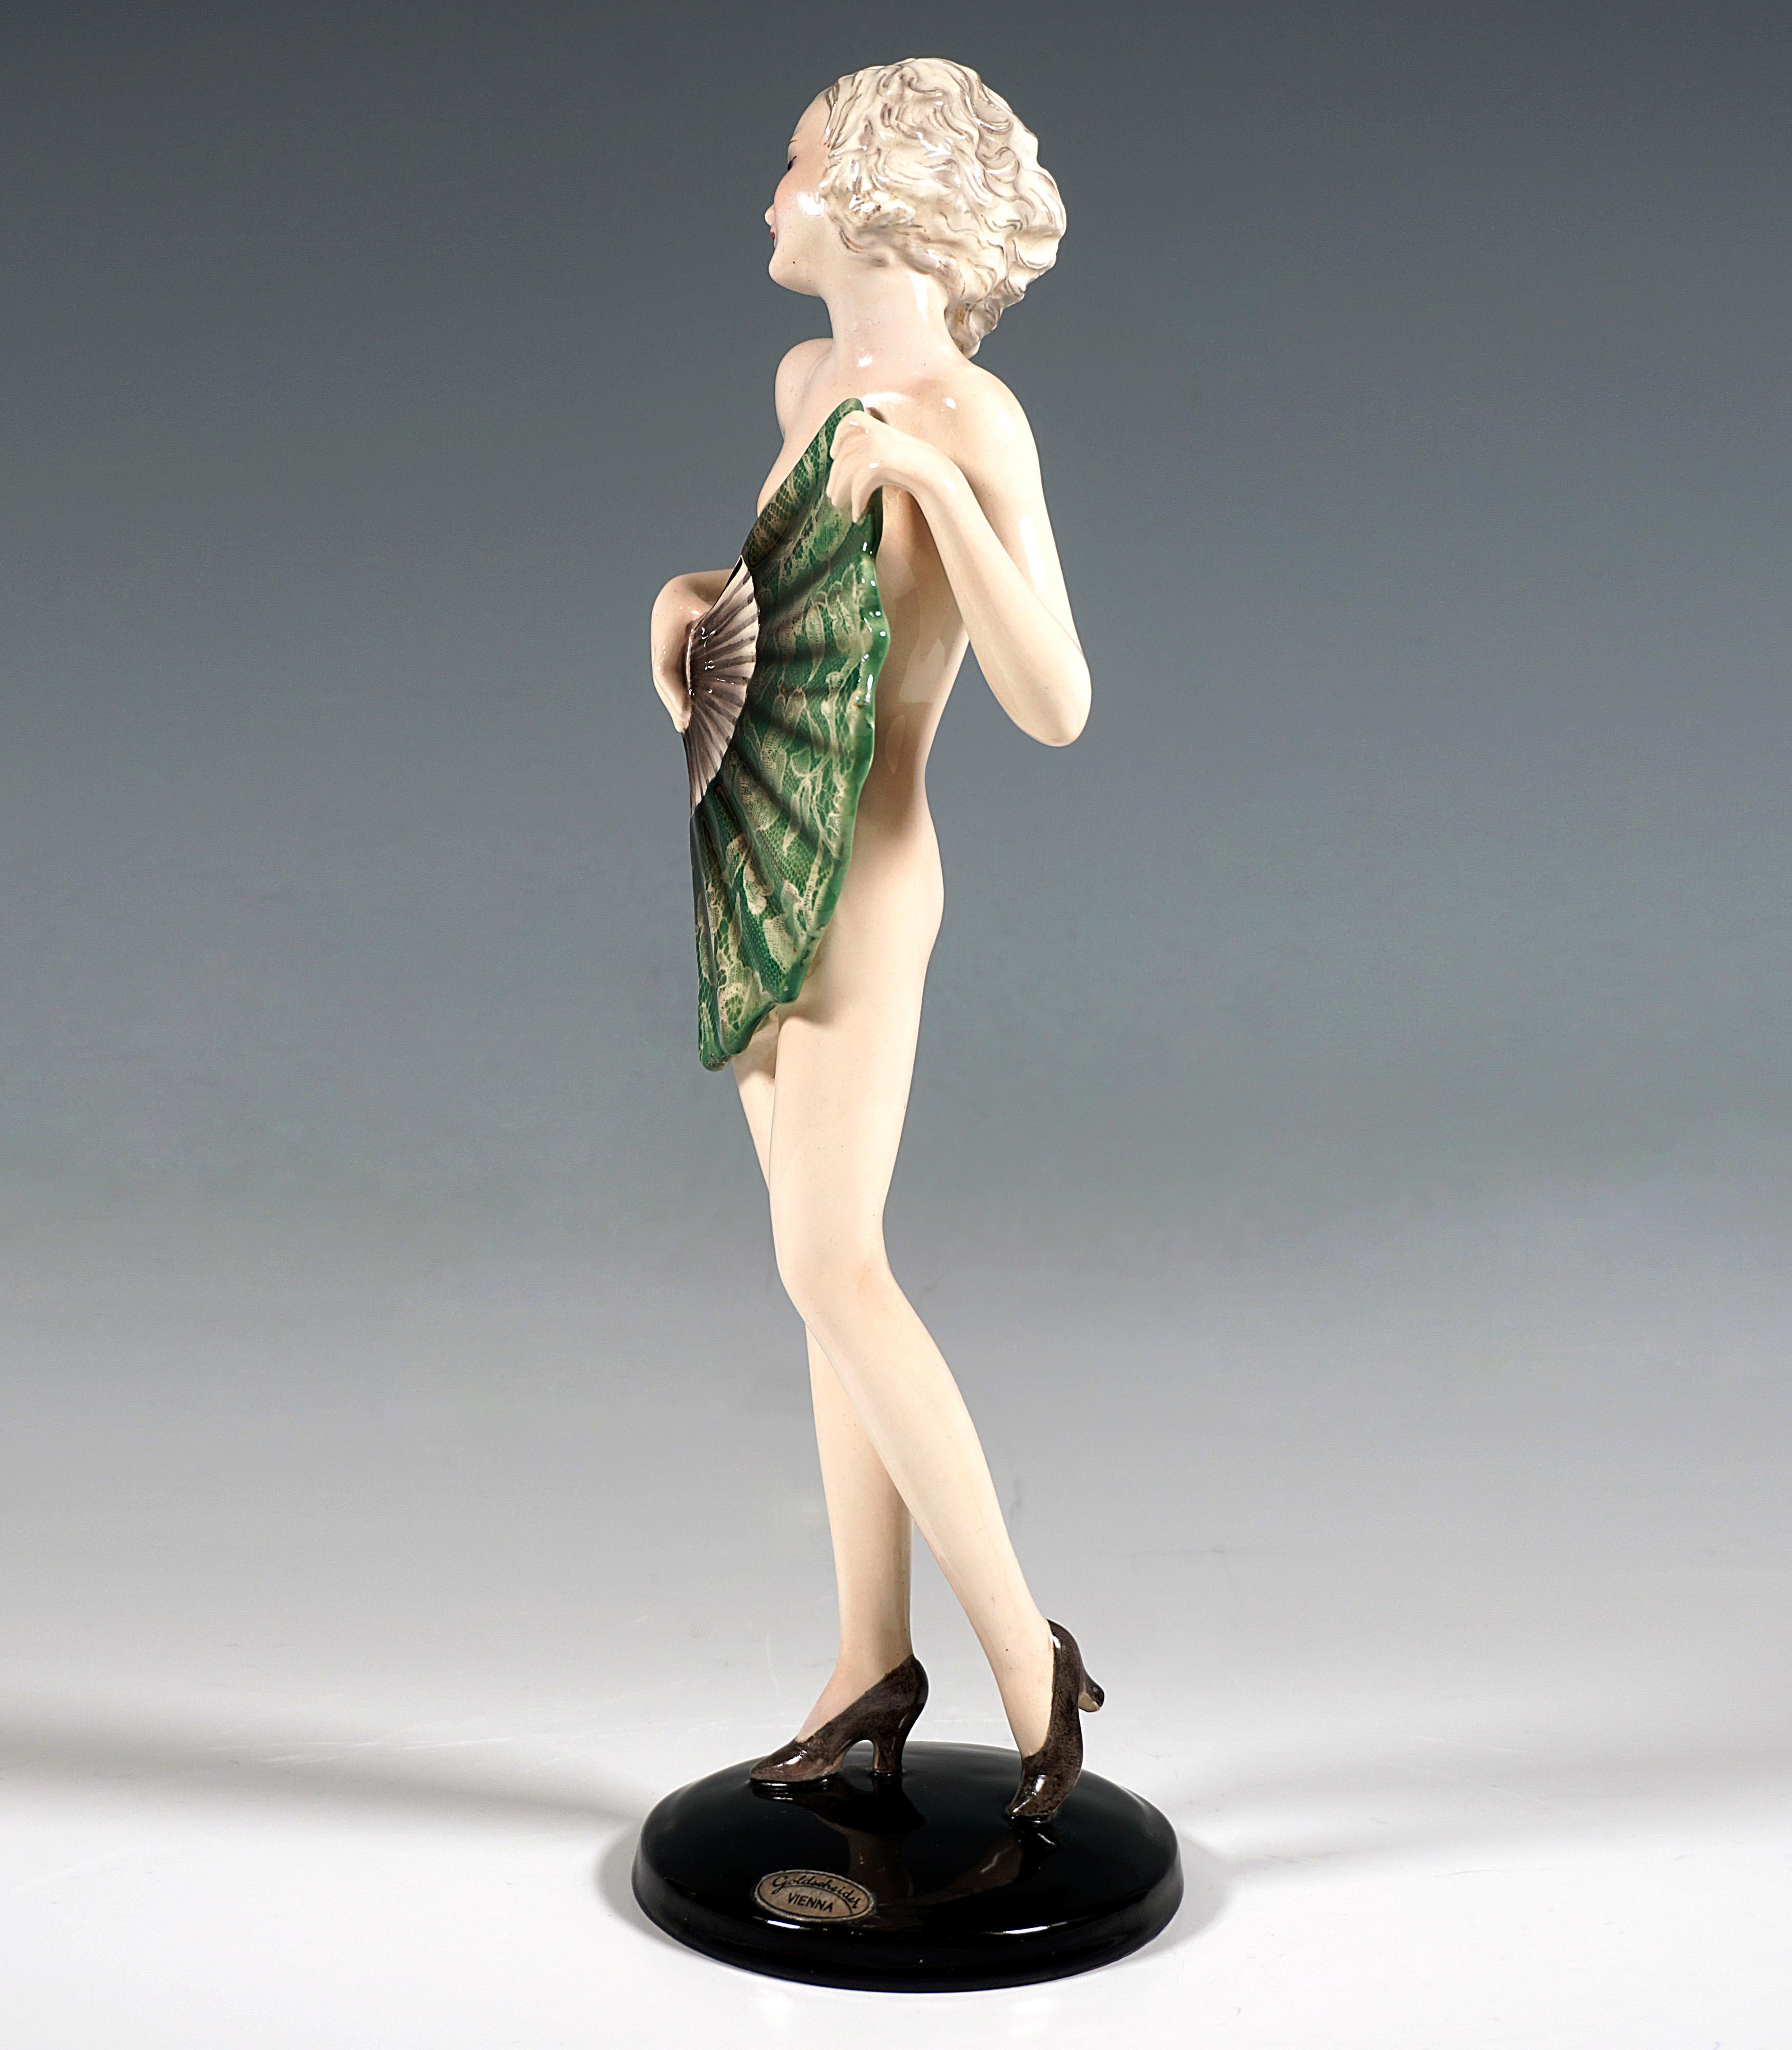 Rare And Excellent Goldscheider Ceramic Figurine of the 1930s:
Standing young lady with shoulder-length blond hair, dressed only in grey heels, looking over her shoulder to the left and holding a large fan covered with green lace in front of her